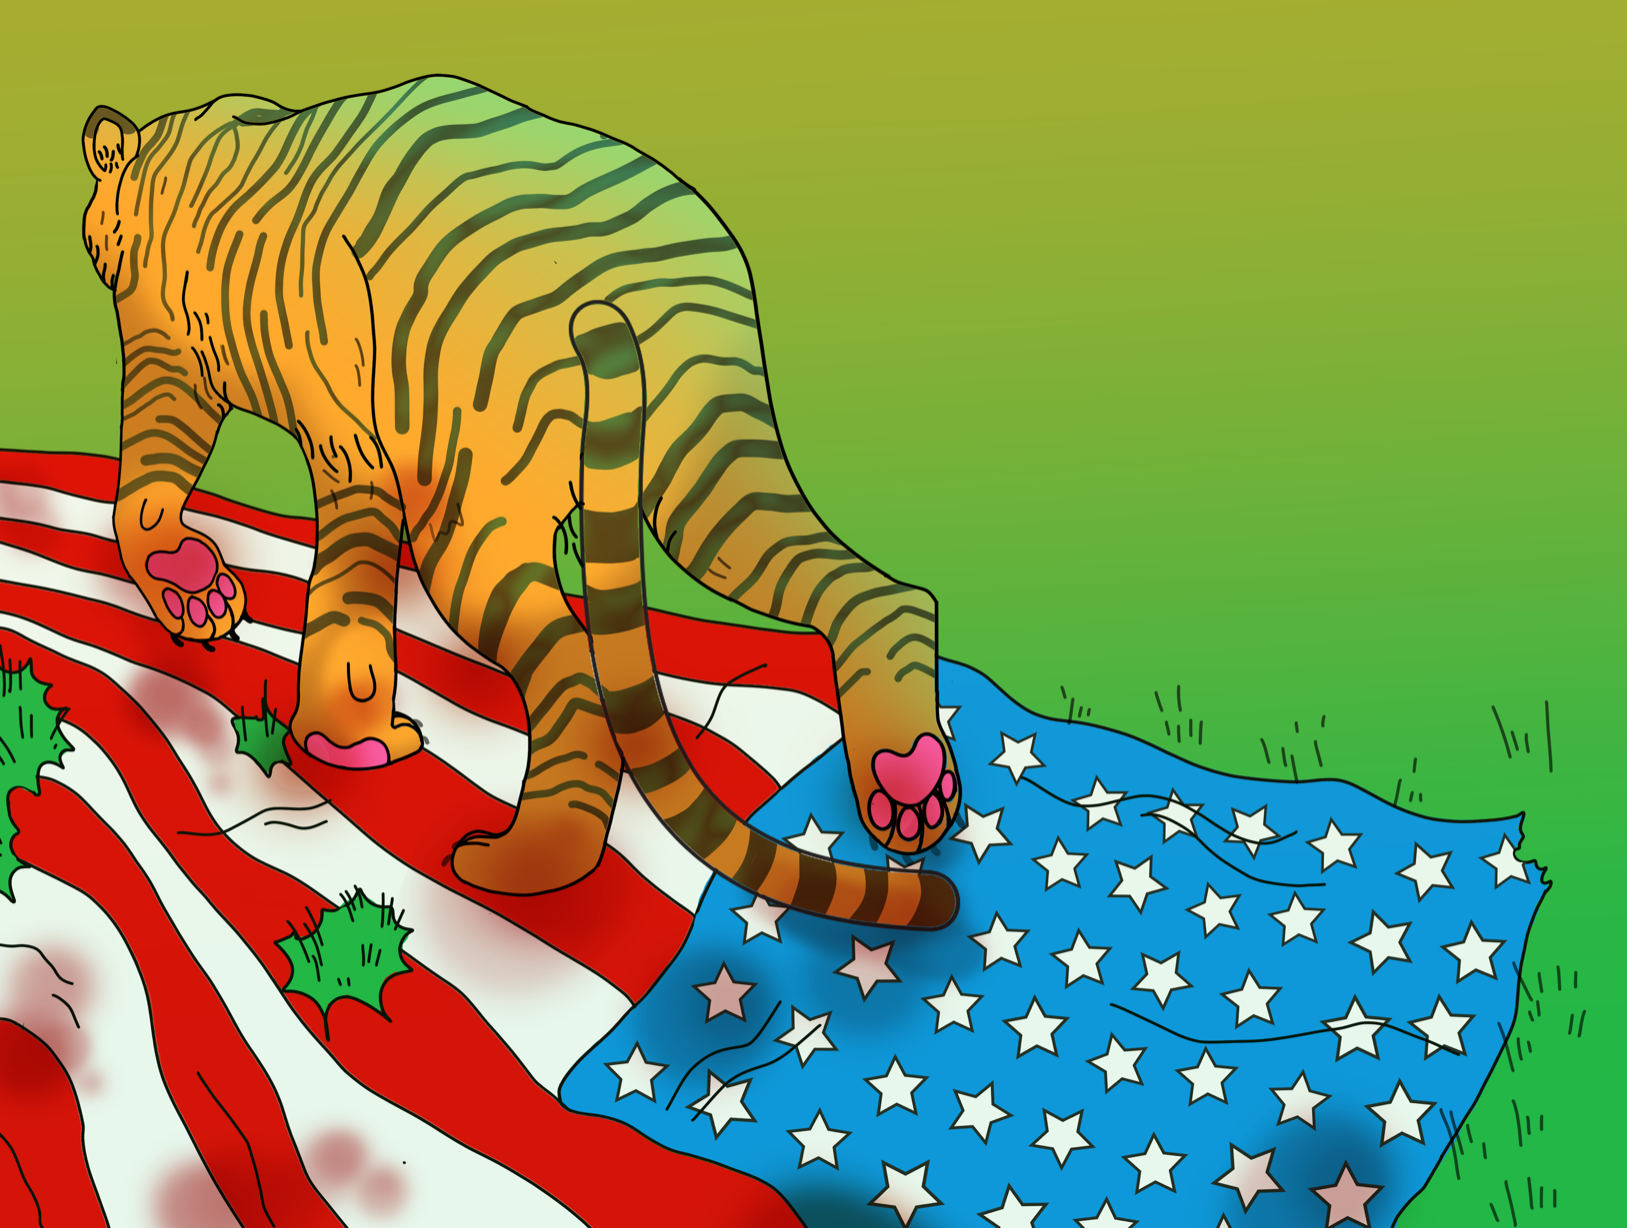 Tiger King, Its Cultures, and the American Dream